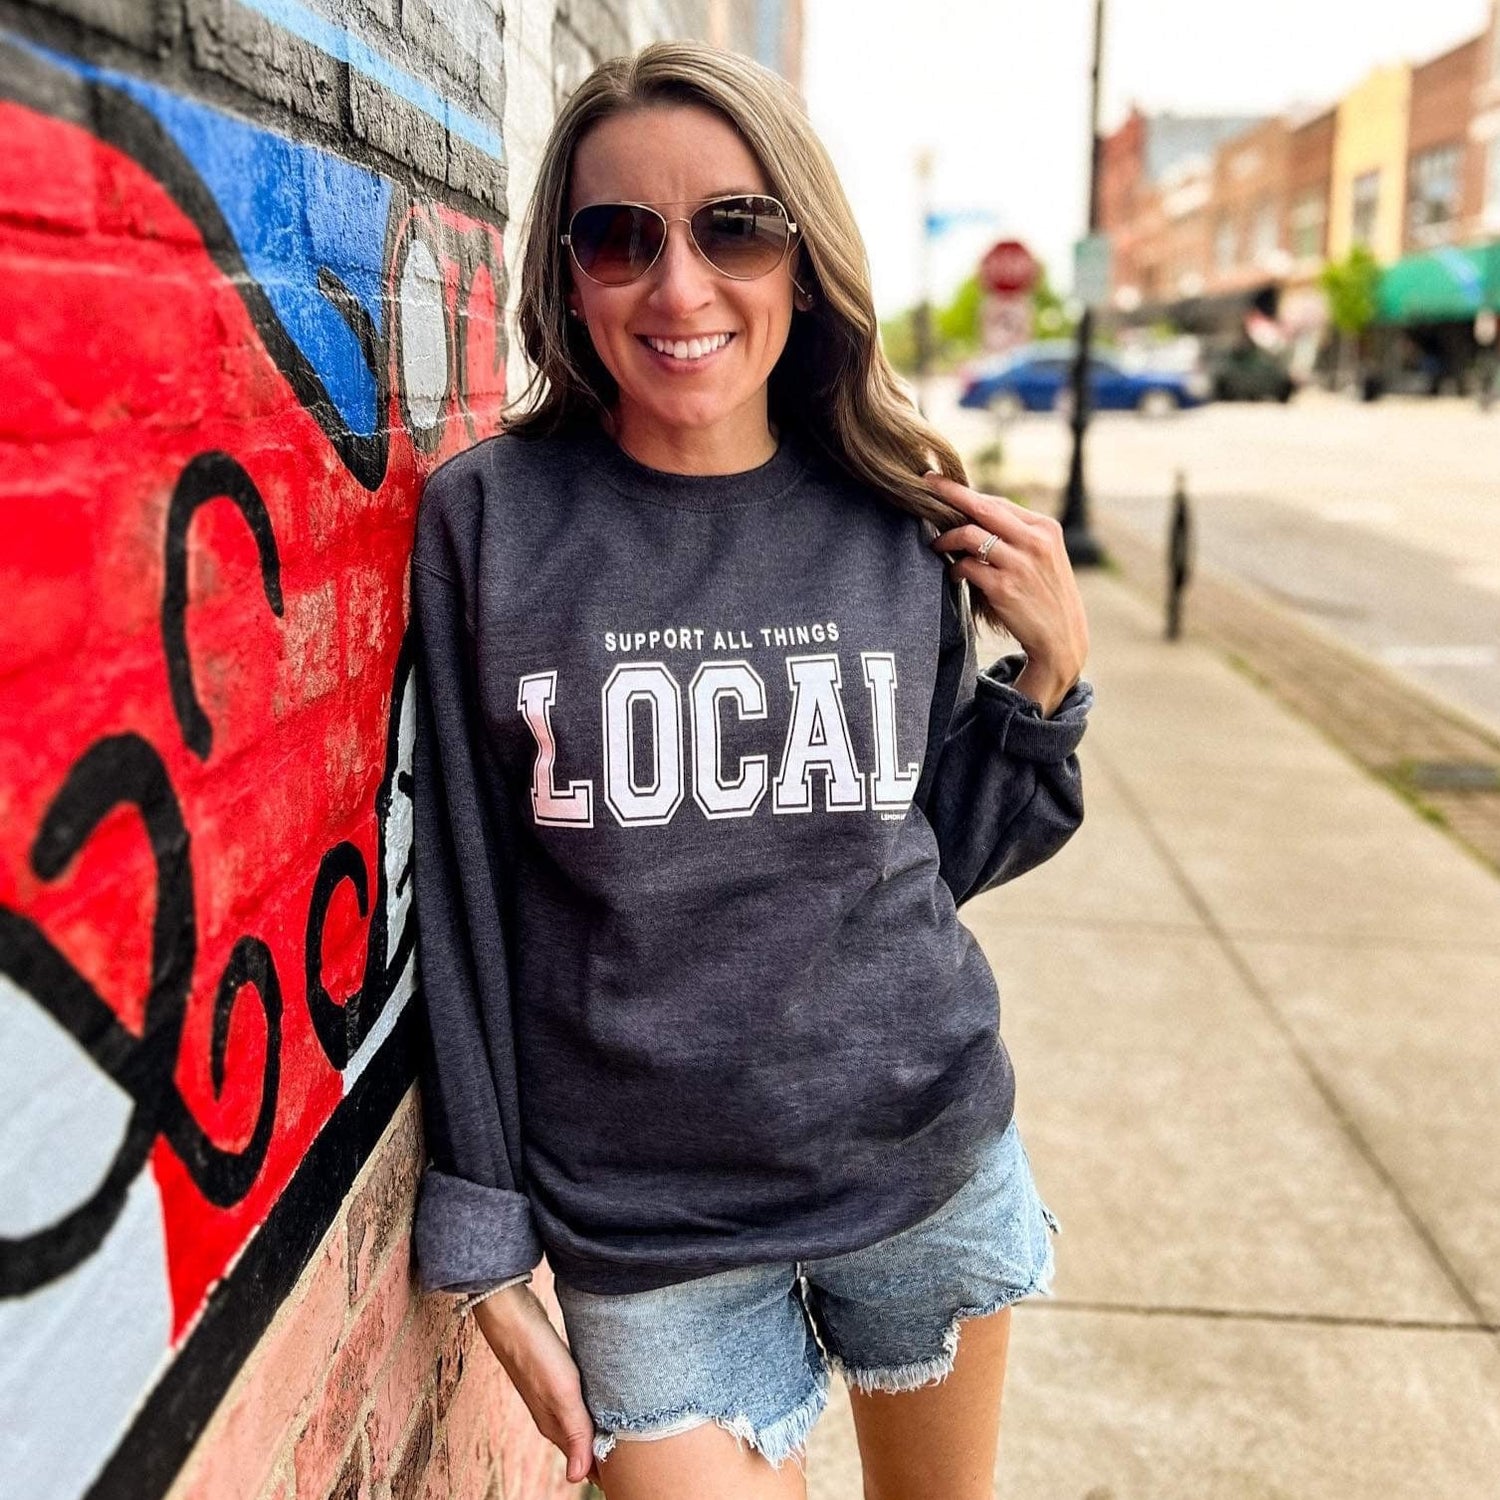 SUPPORT ALL THINGS LOCAL - Crewneck Sweatshirt